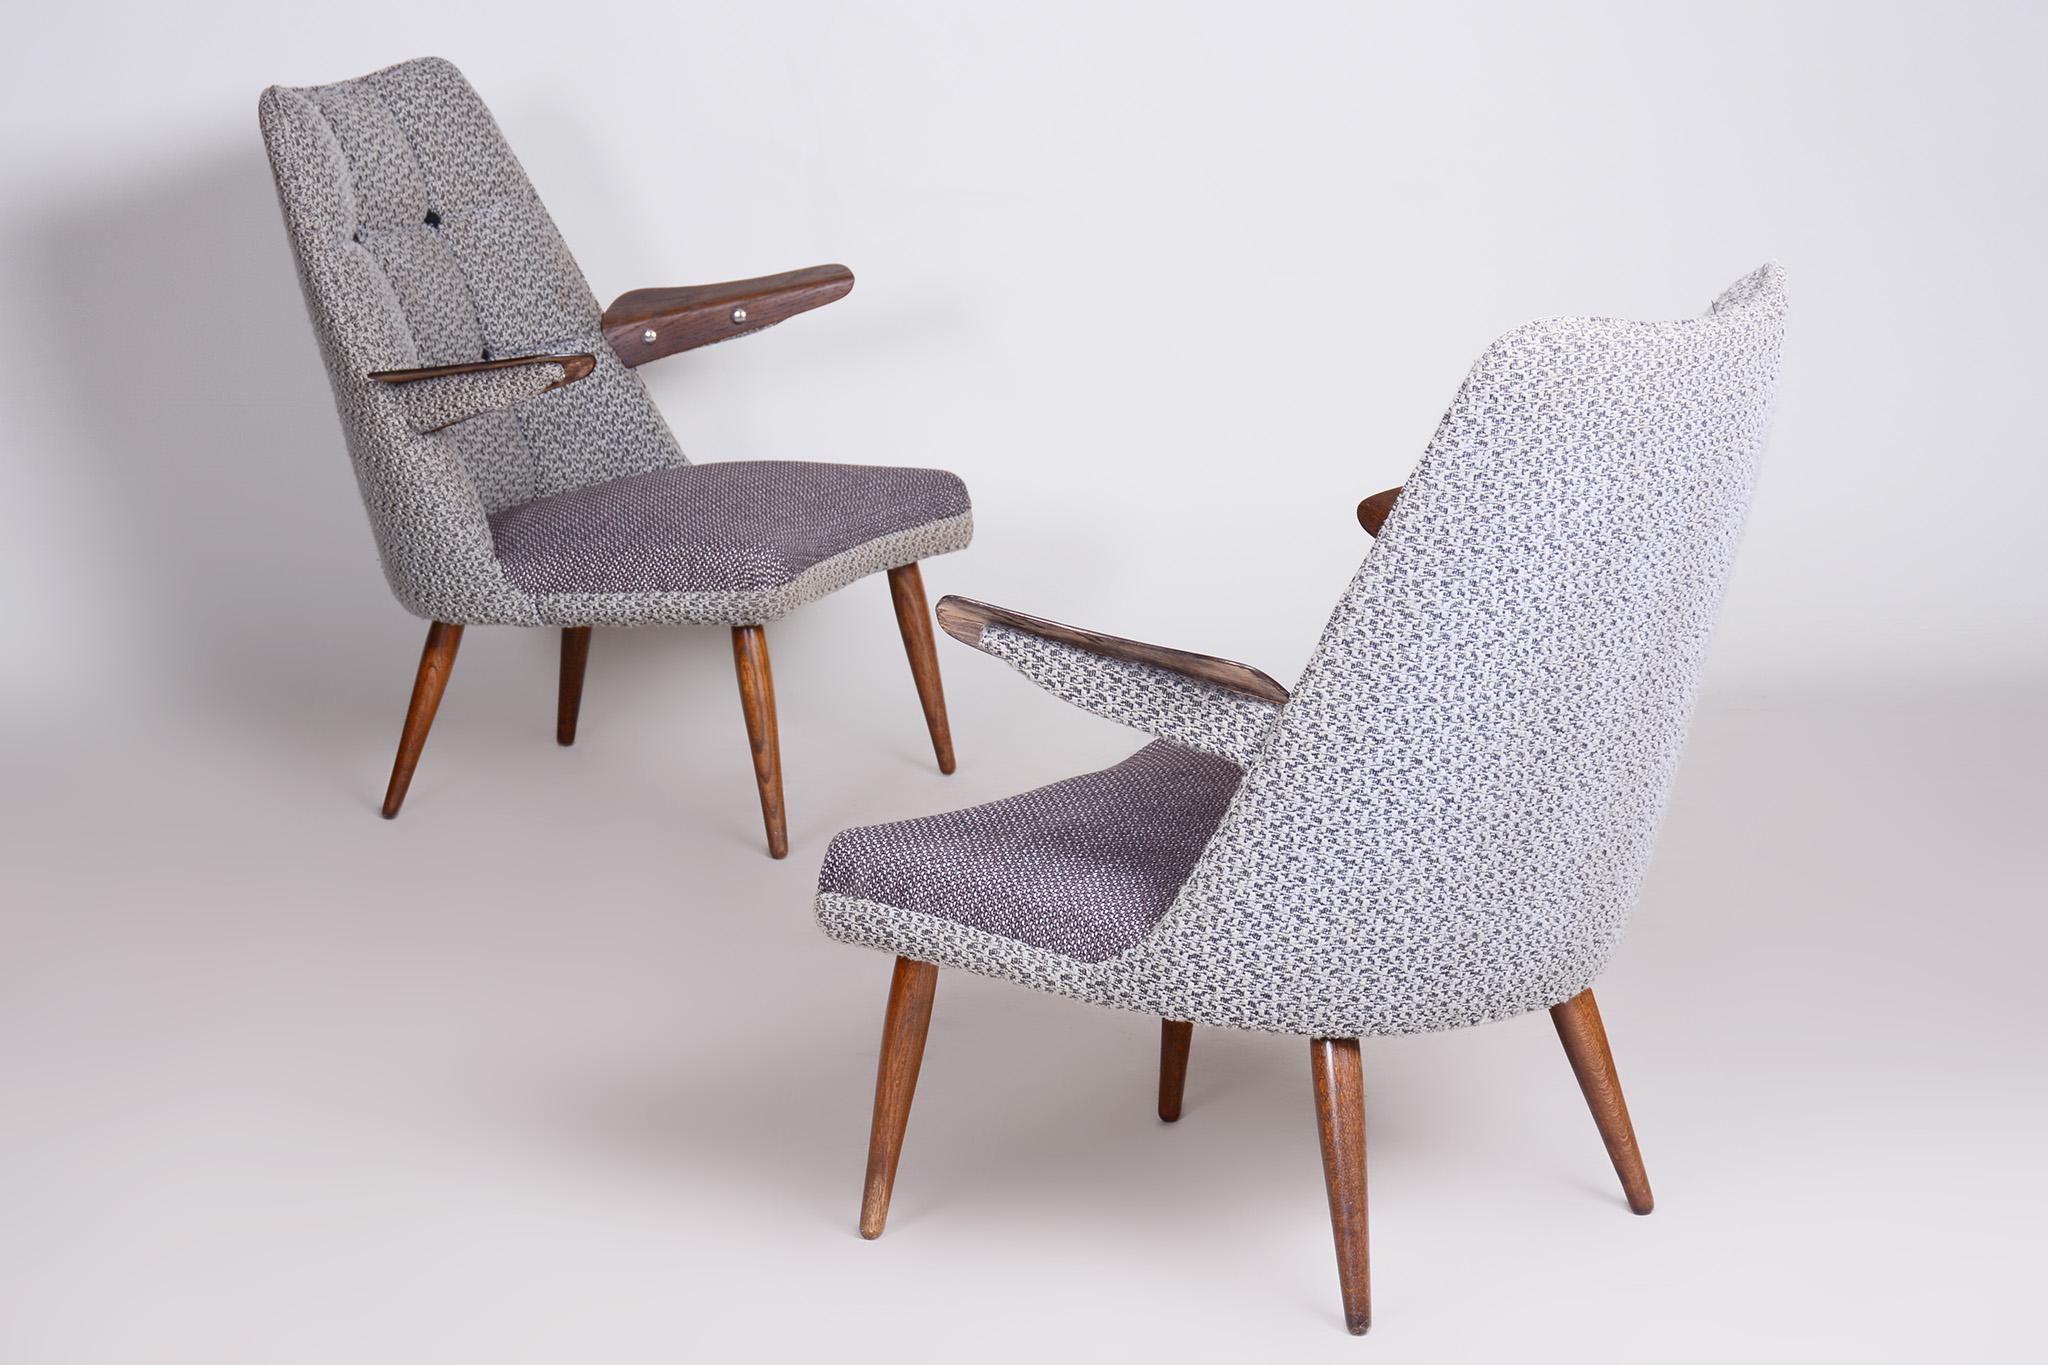 Set of Two Grey Mid Century Armchairs Made in 1950s Czechia, Original Condition For Sale 4